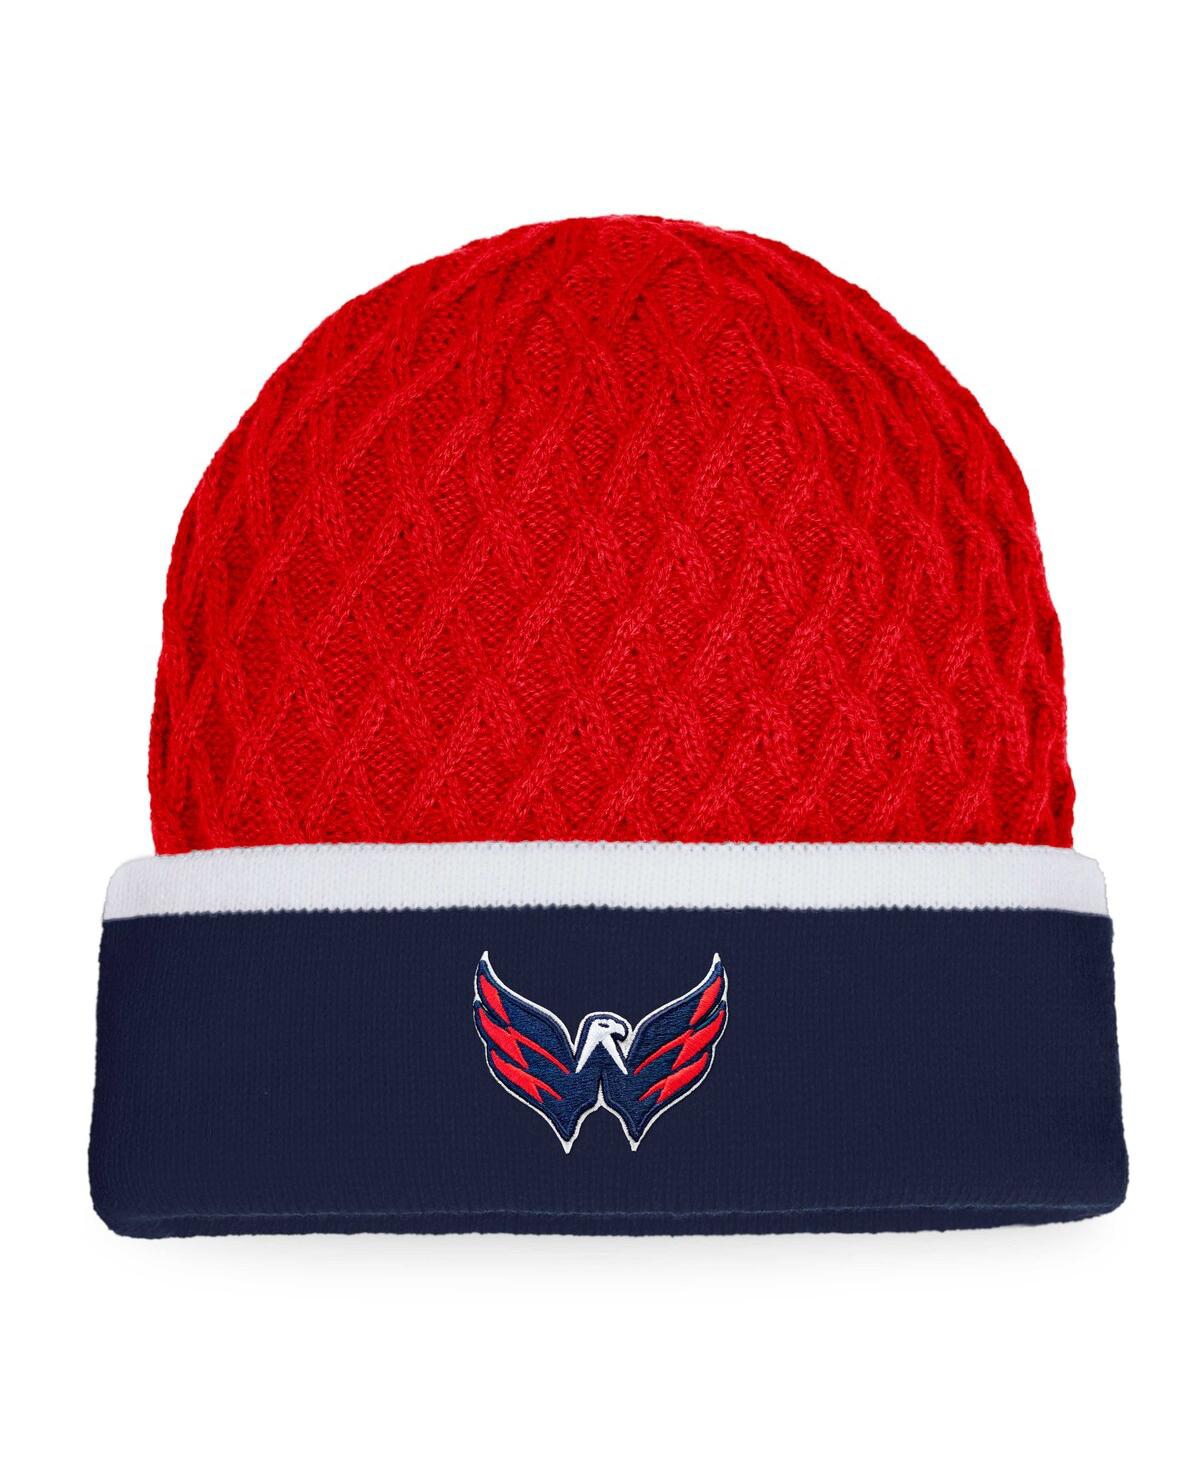 Fanatics Men's  Red, Navy Washington Capitals Iconic Striped Cuffed Knit Hat In Red,navy